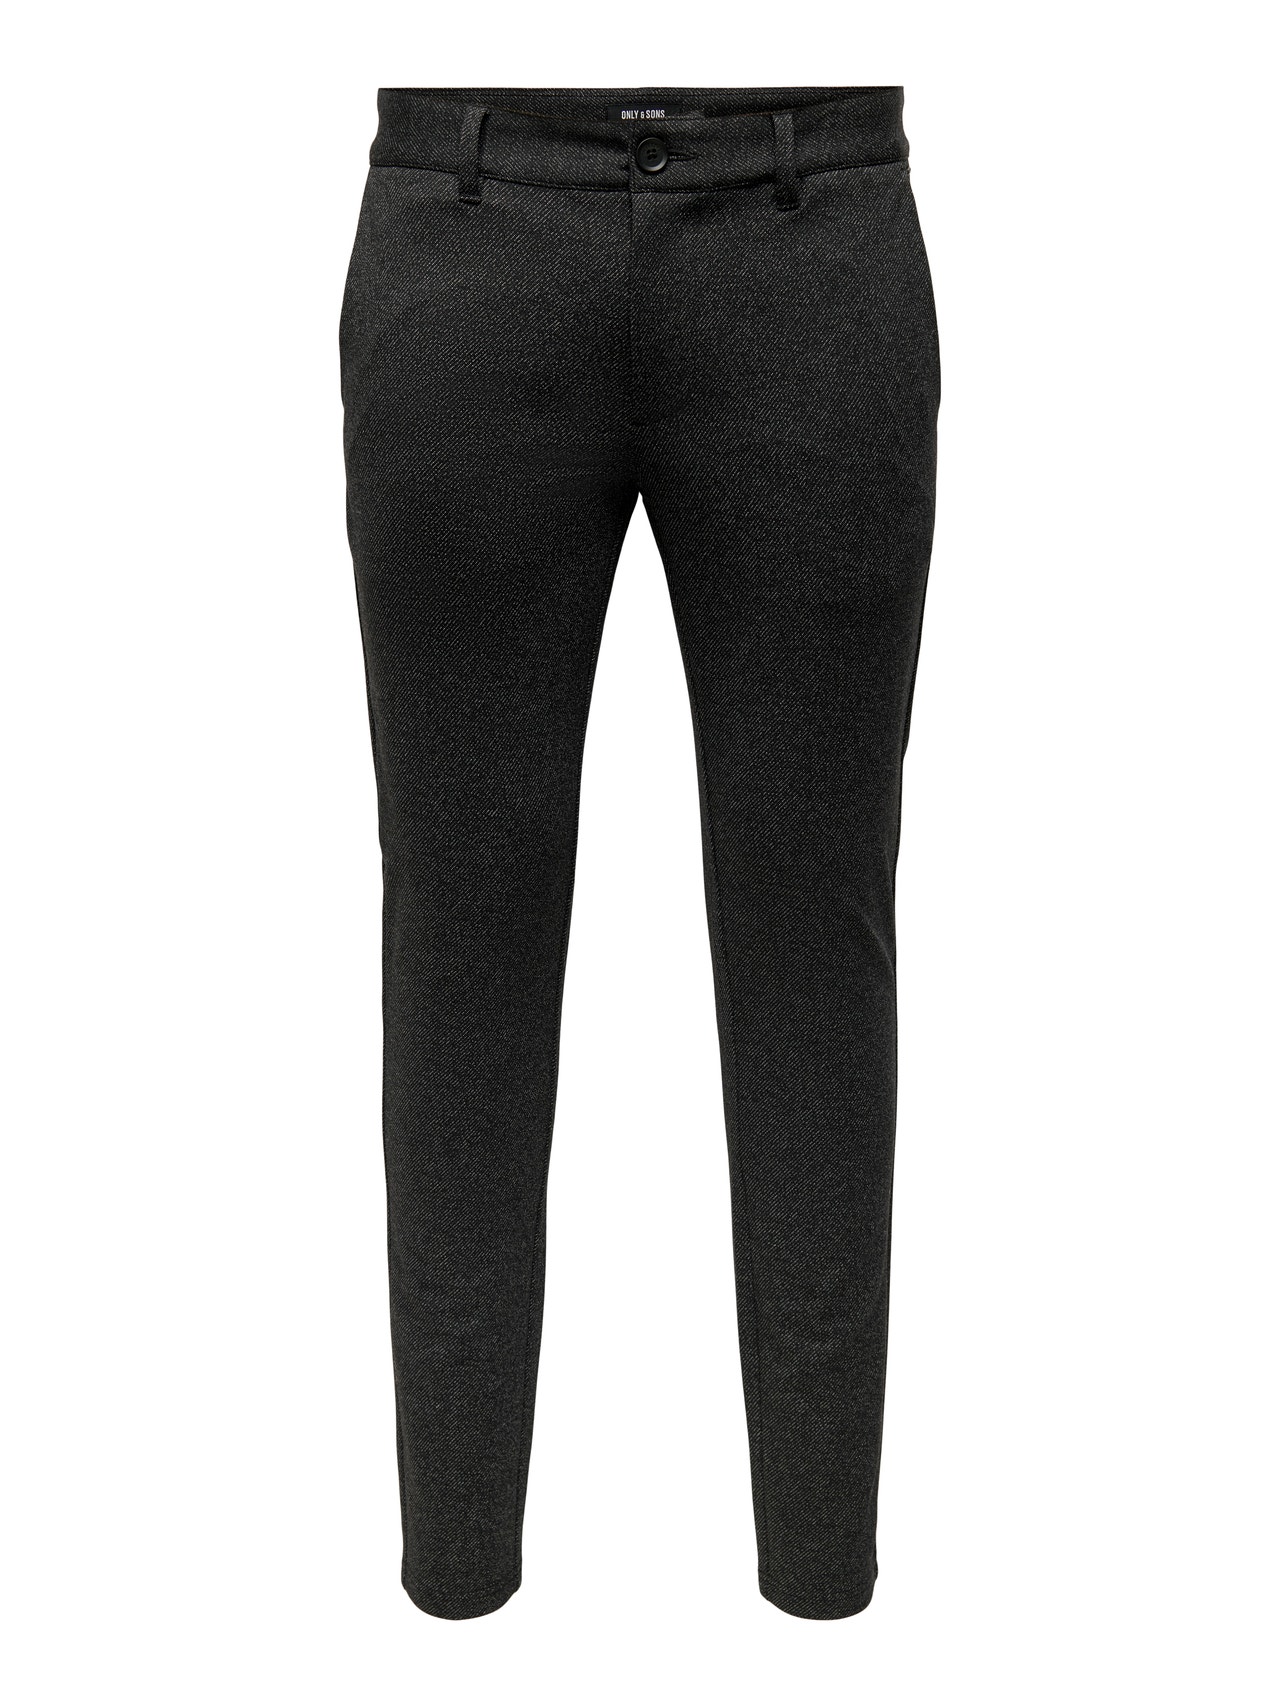 ONLY & SONS Elasticated pants -Black - 22023496